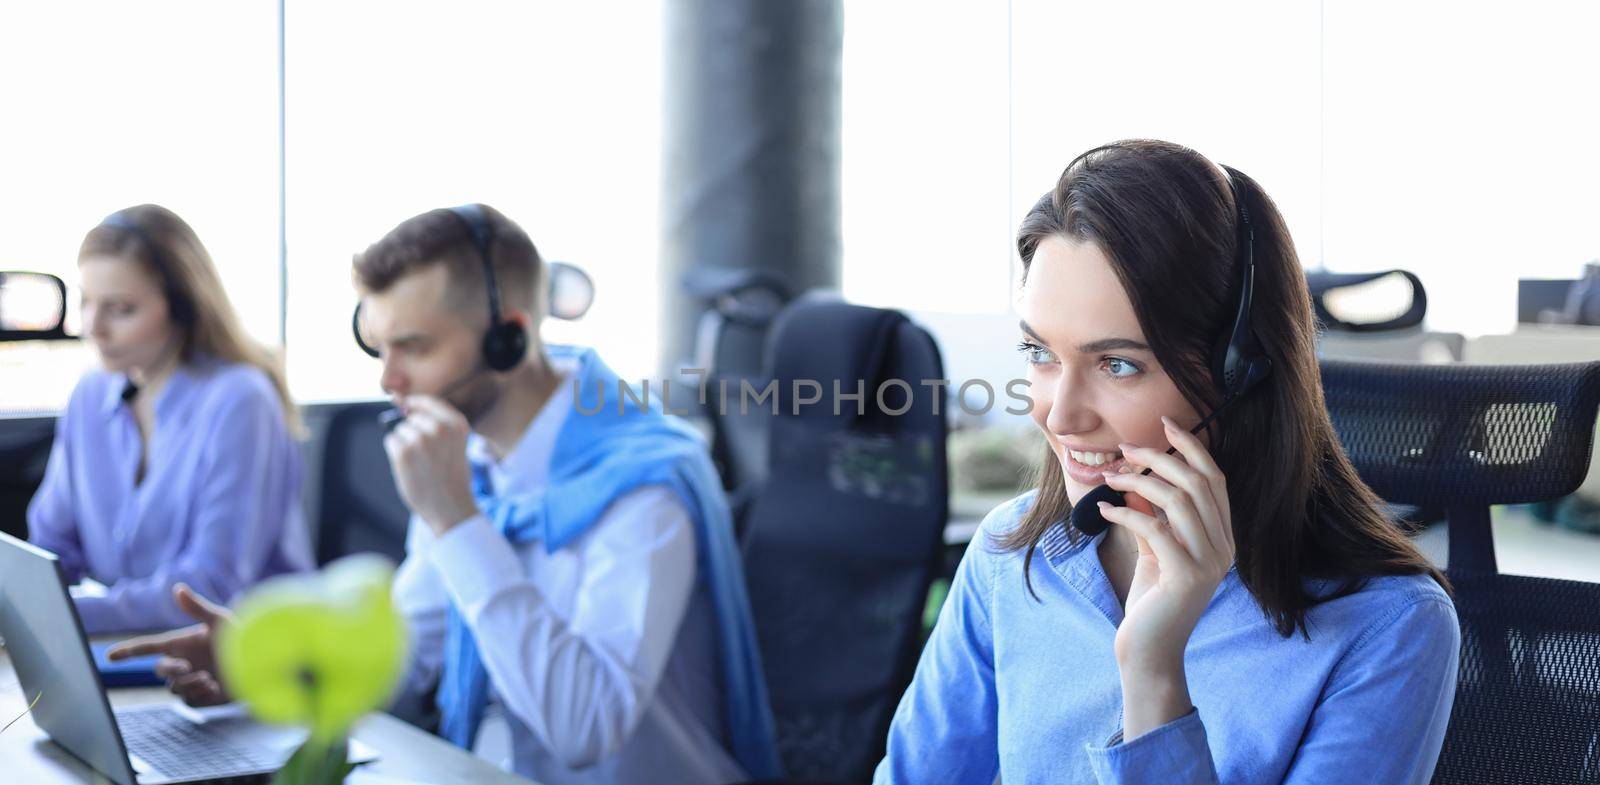 Female customer support operator with headset and smiling, with collegues at background. by tsyhun